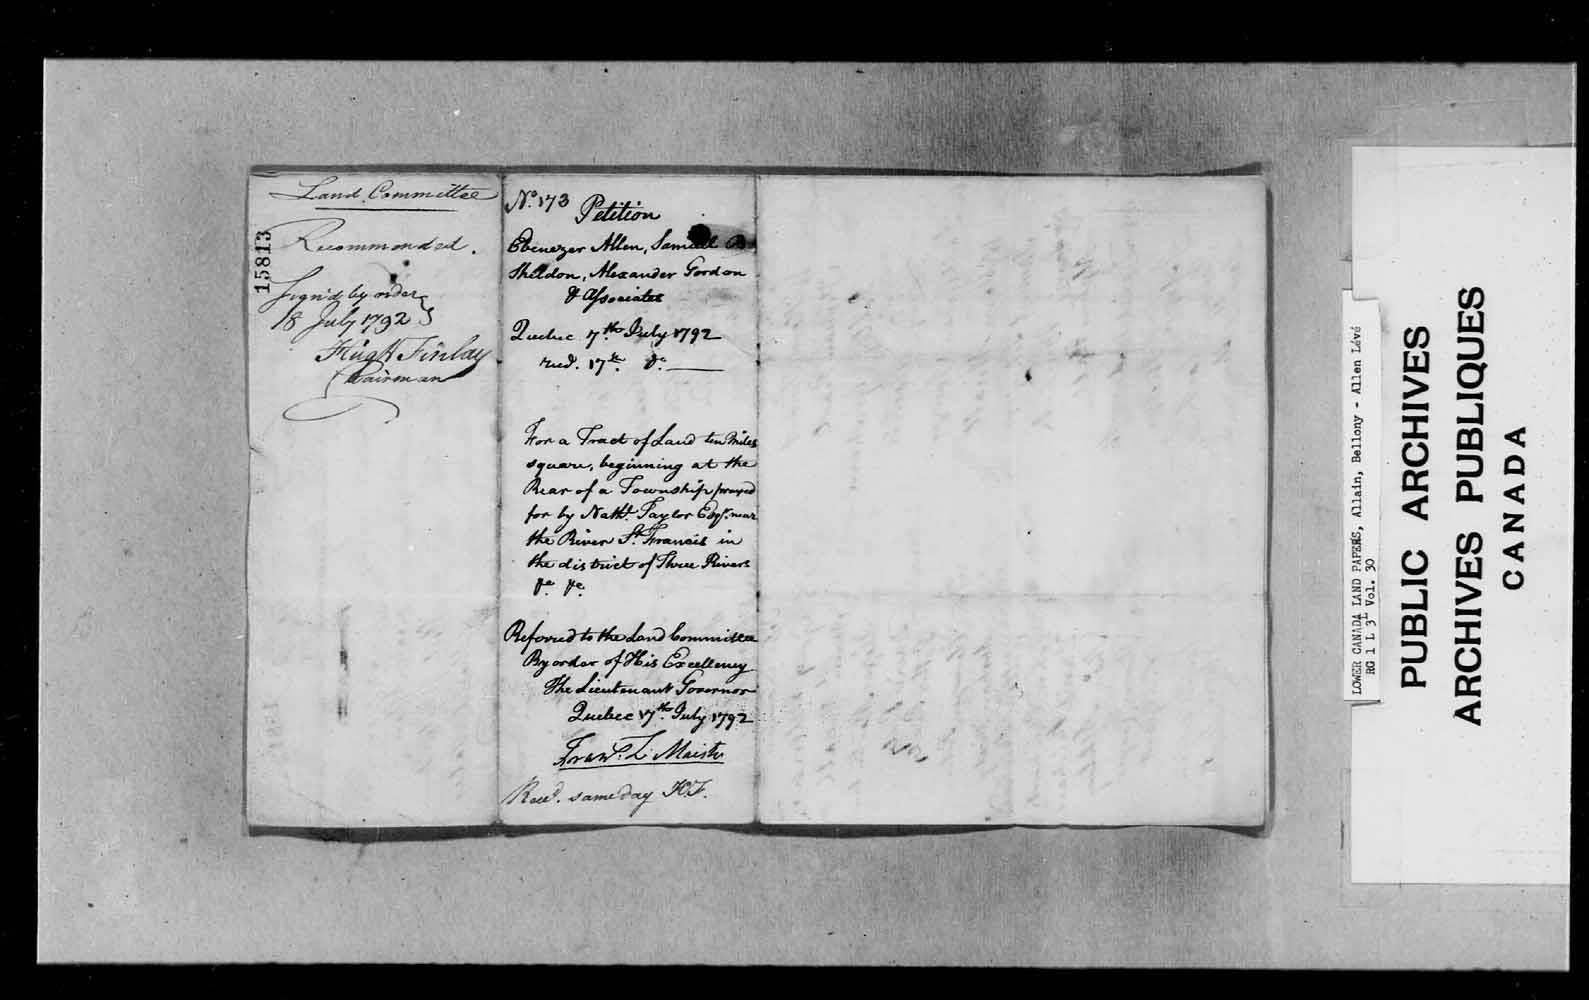 Digitized page of  for Image No.: e003702643